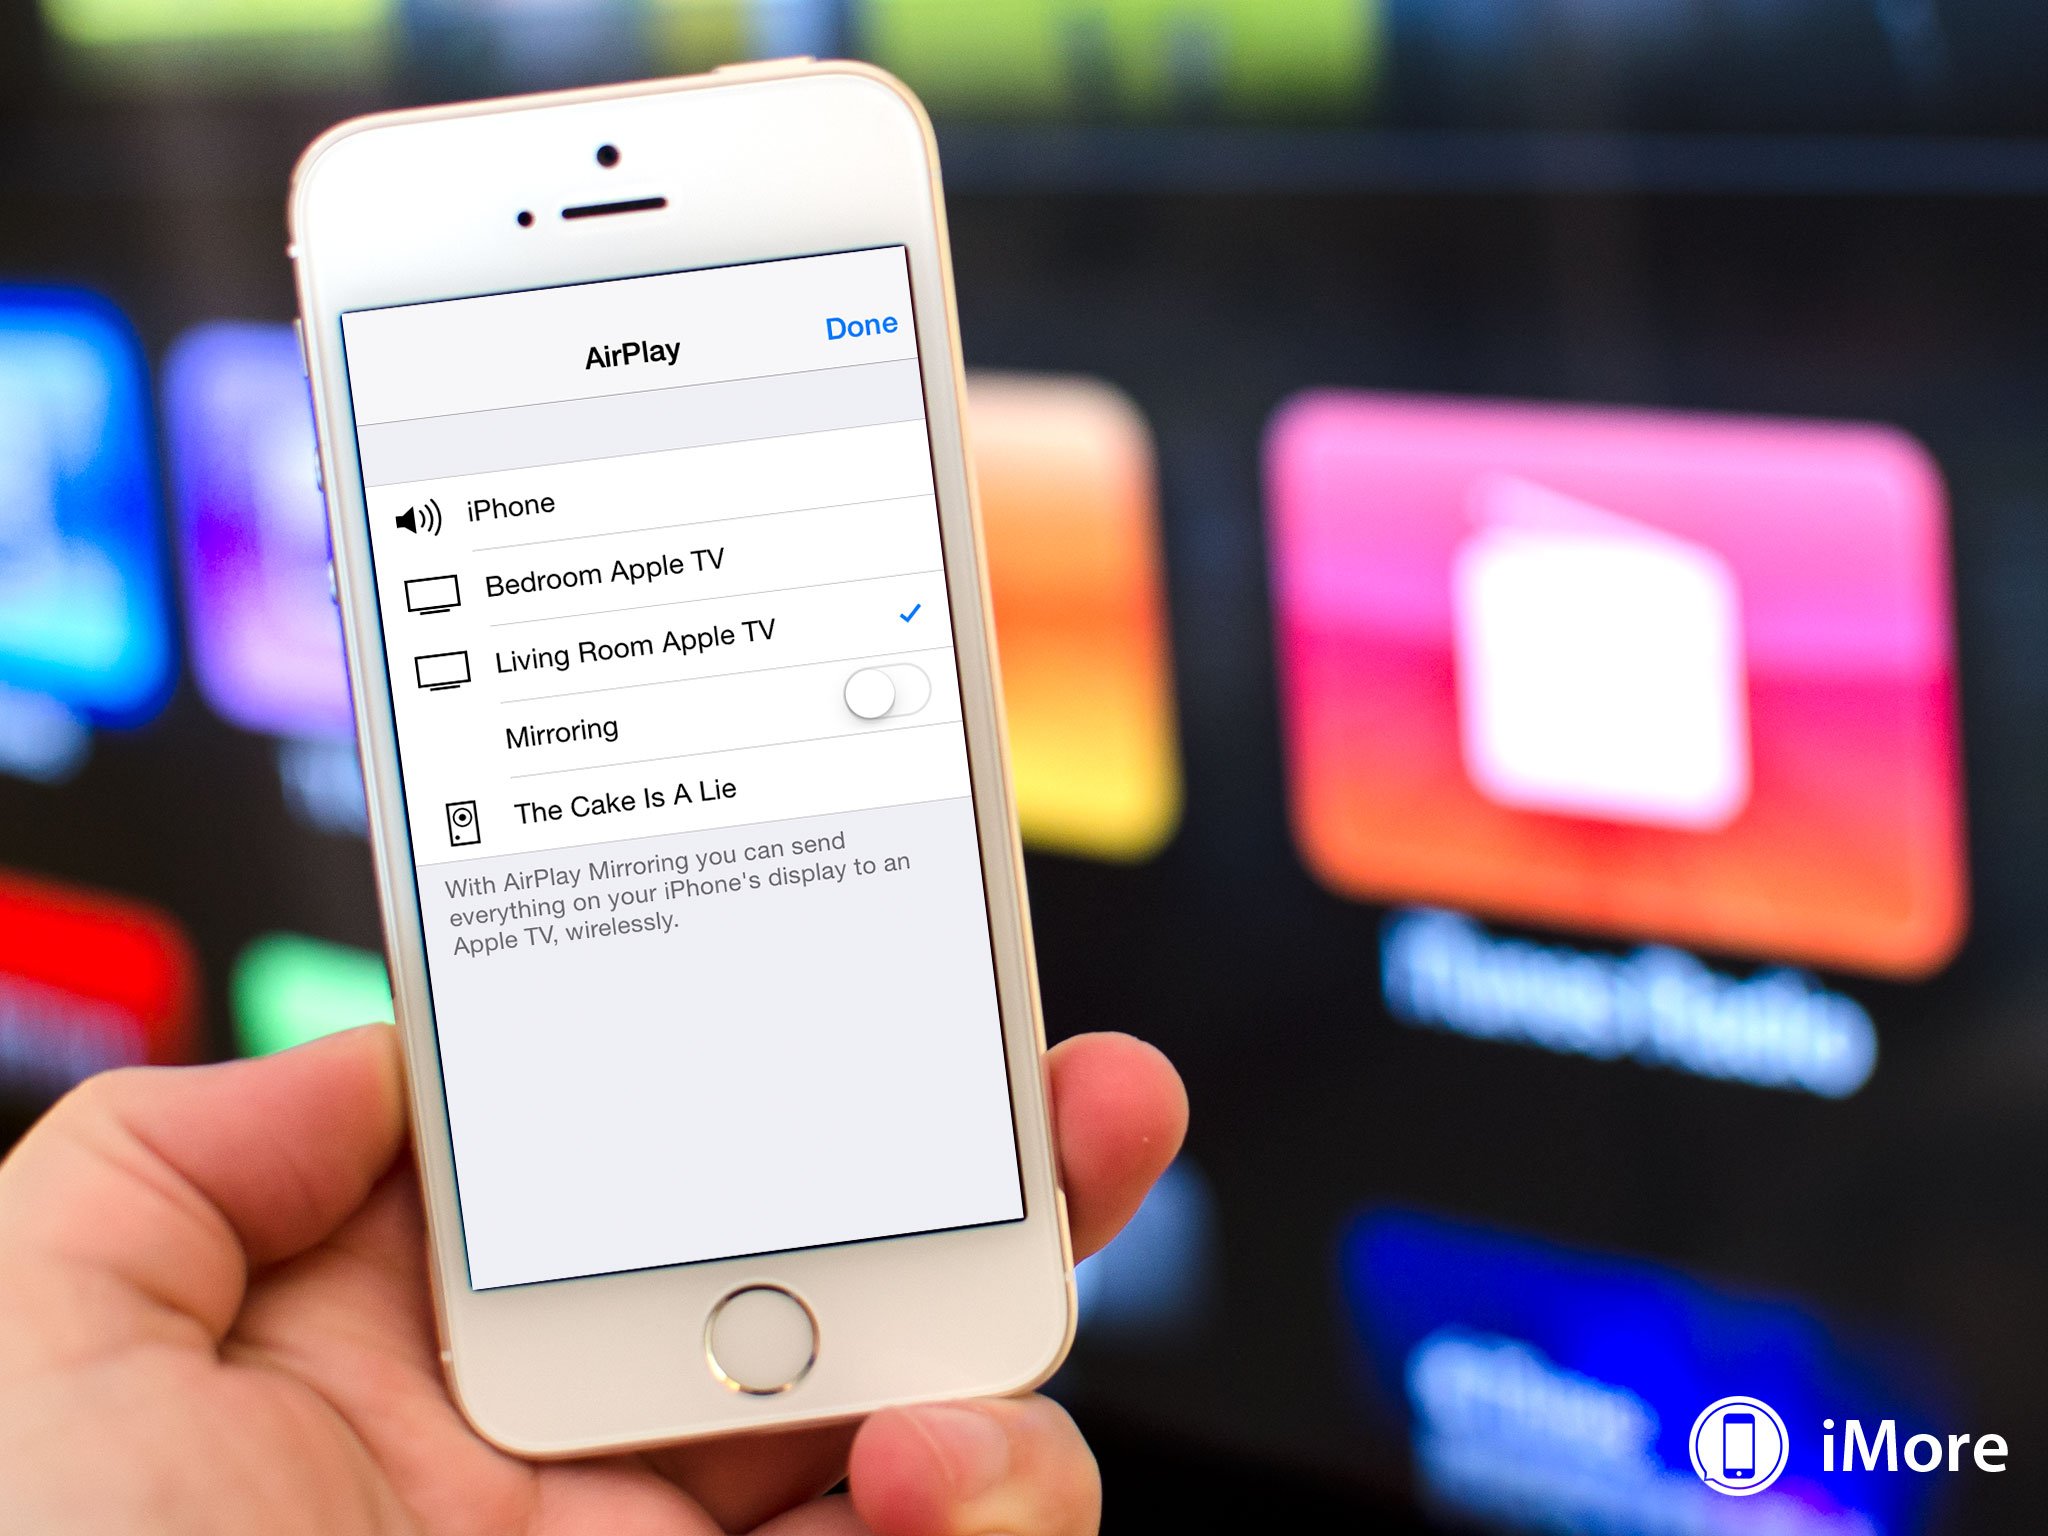 How to use Control Center to AirPlay videos to your Apple TV